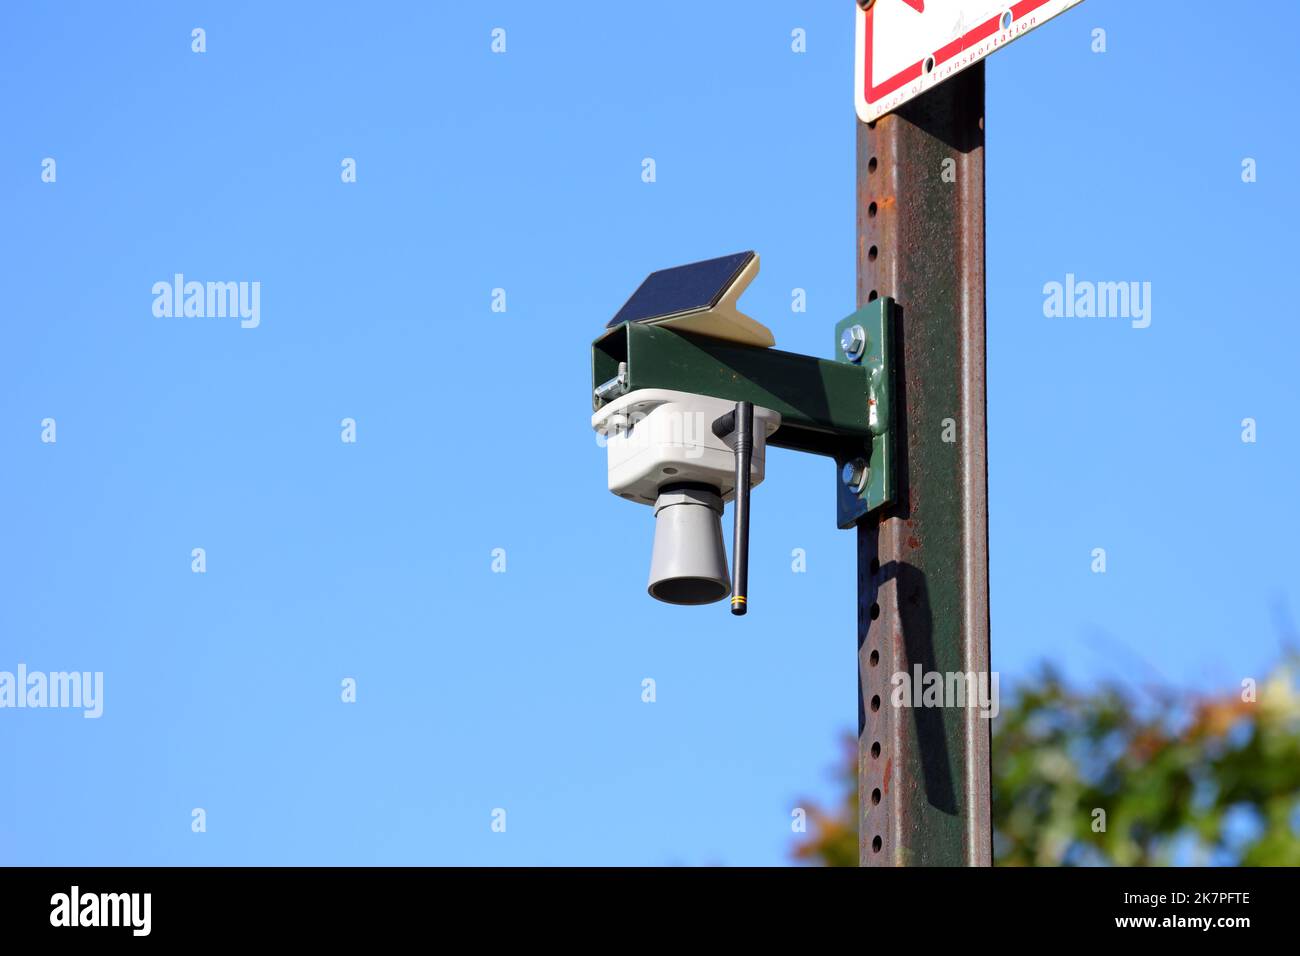 An experimental, real-time flood sensor mounted on a pole in Brooklyn's Gowanus neighborhood, an area vulnerable to flooding and inundation. Stock Photo